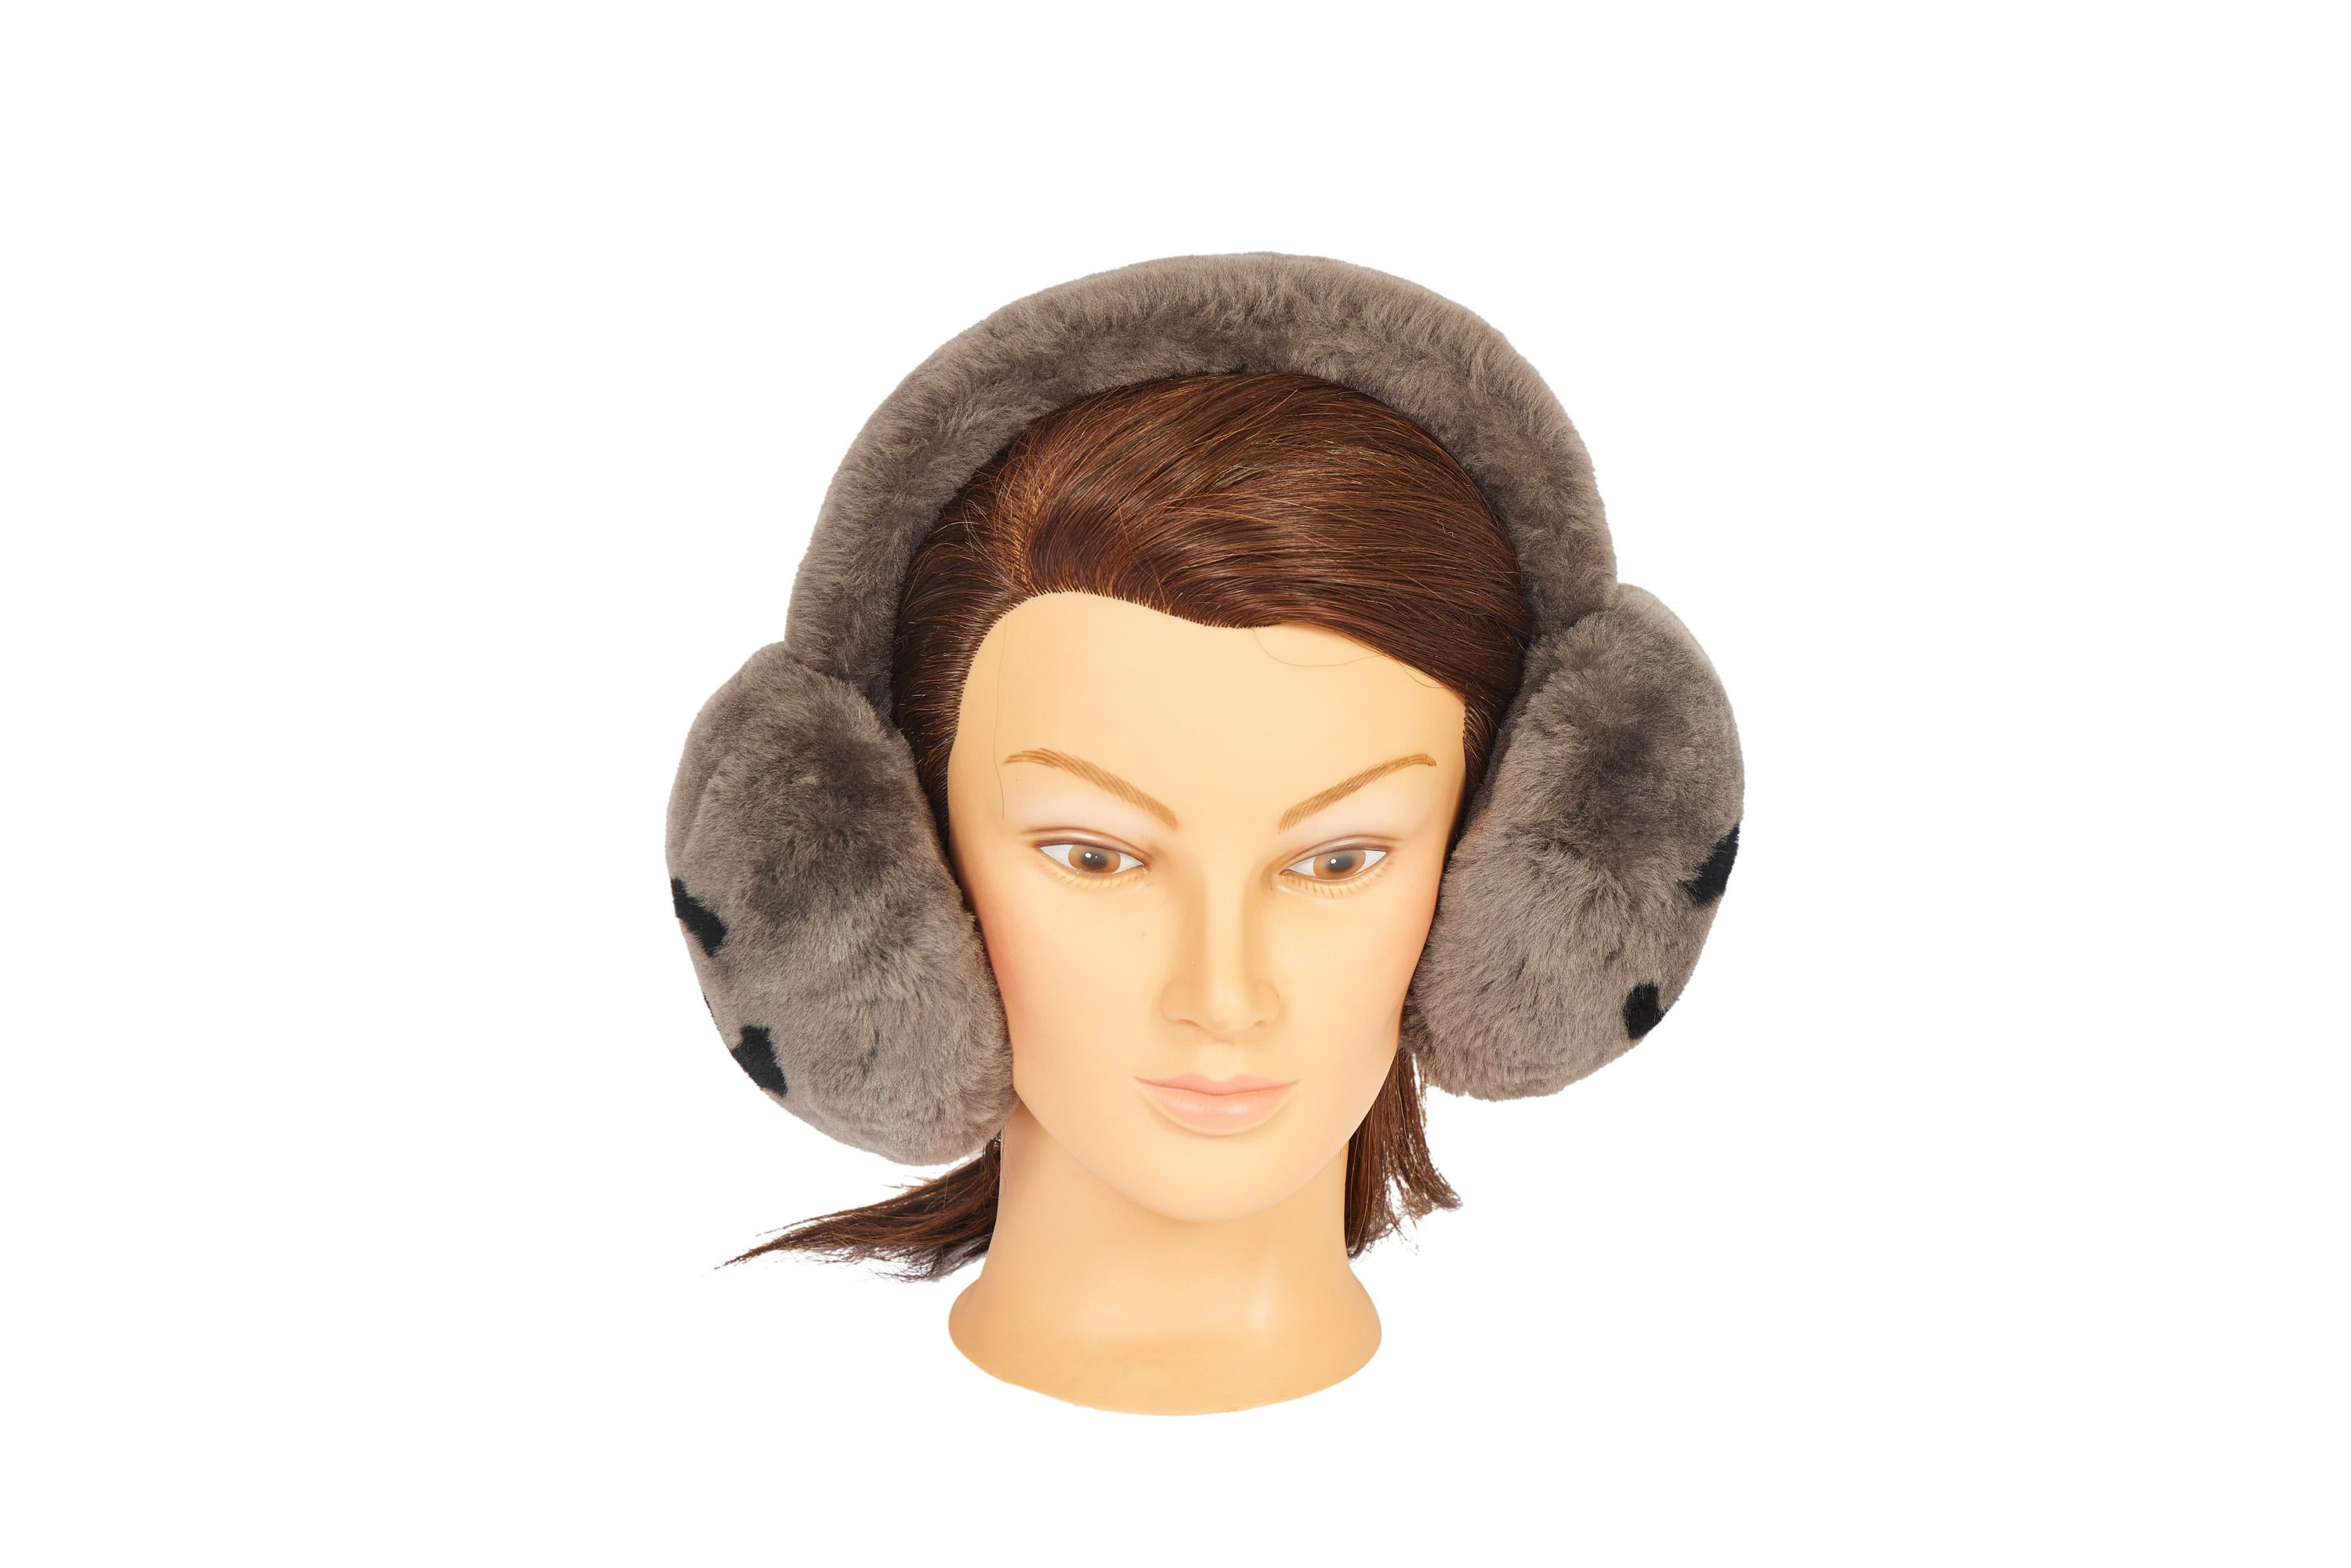 These super rare Chanel ear muffs will keep your ears warm when you're on the slopes. They're made of shearling and colored in grey. But sides show a big double black CC logo. The pieces come in the original Chanel box.